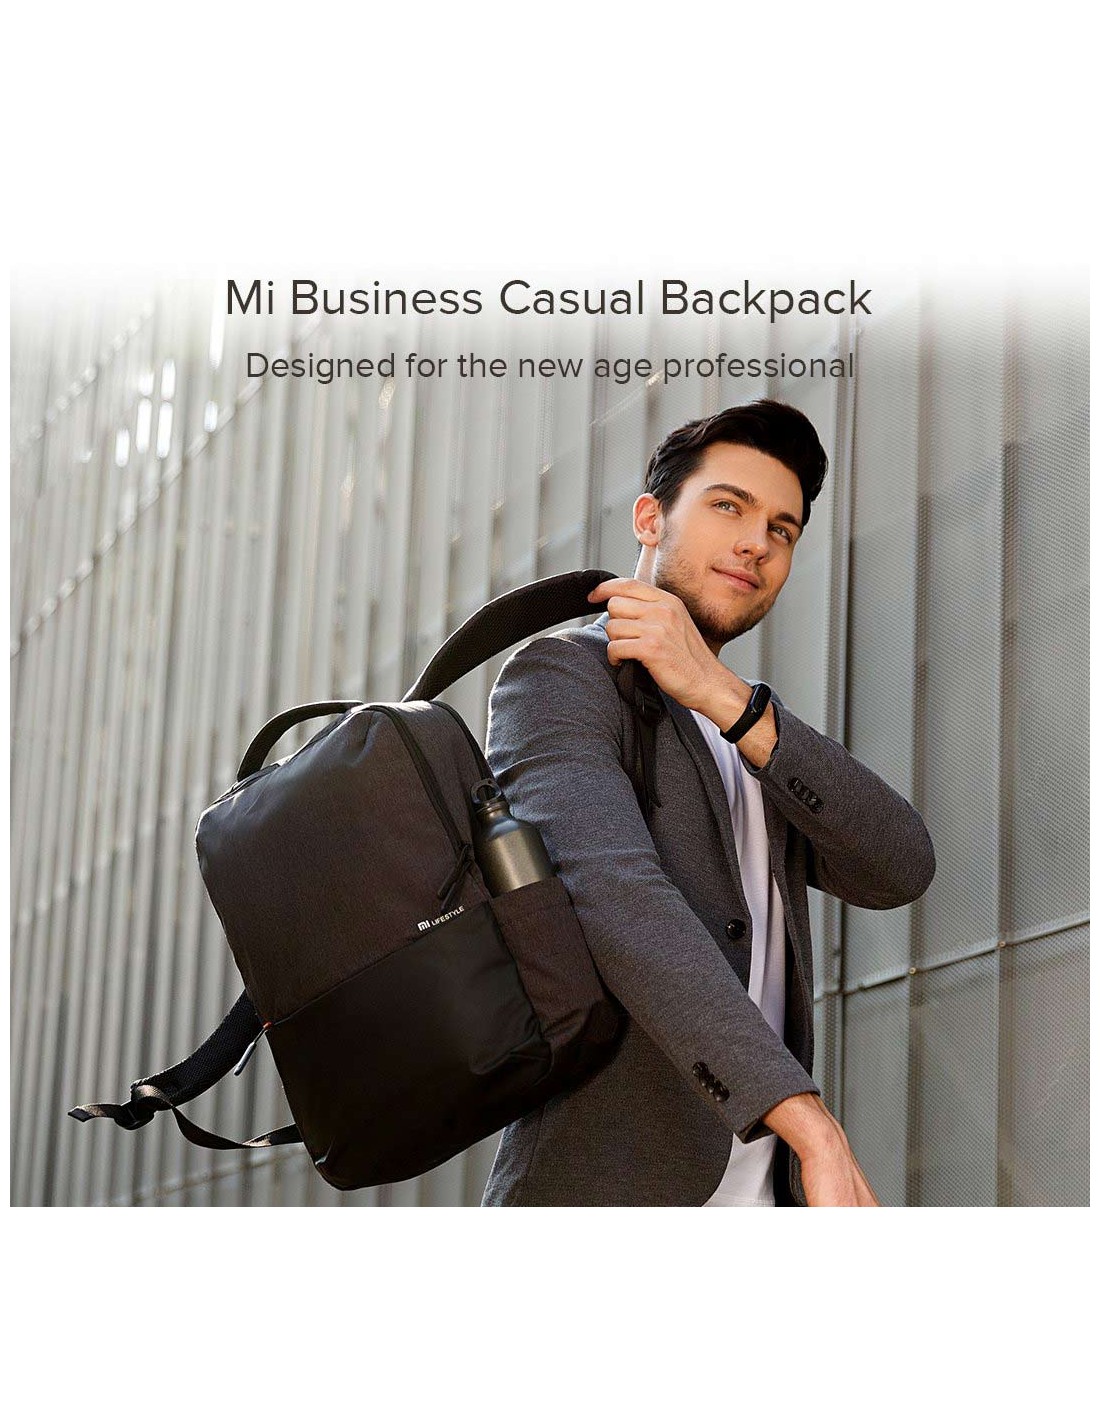 16 Laptop-Friendly Backpacks For The Back-At-Work Commuter | HuffPost Life